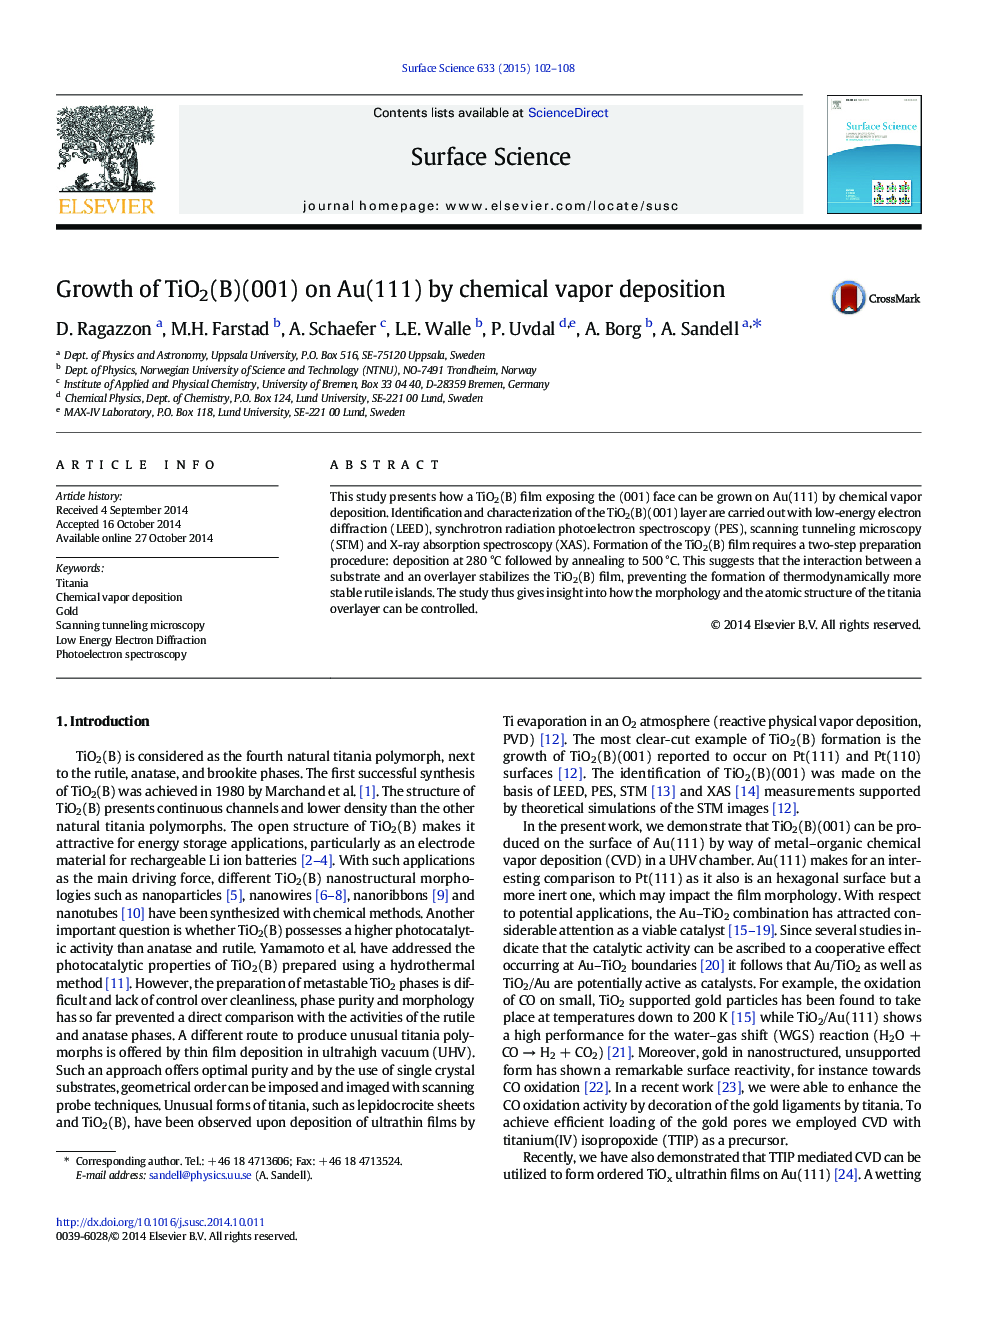 Growth of TiO2(B)(001) on Au(111) by chemical vapor deposition